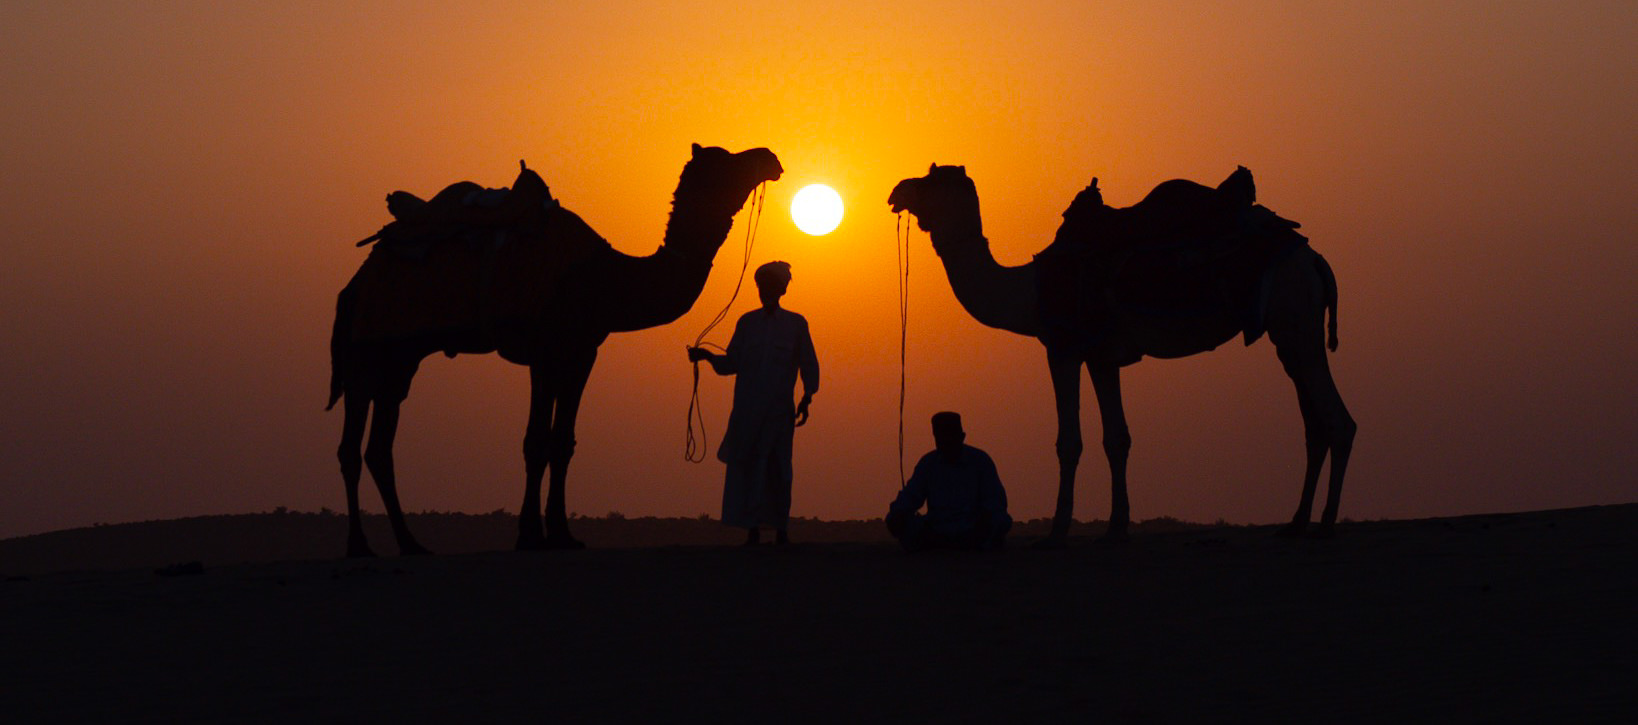 Sunset on the sand dunes in Jaisalmer — and yes, we will endeavor to create a photo like this together!